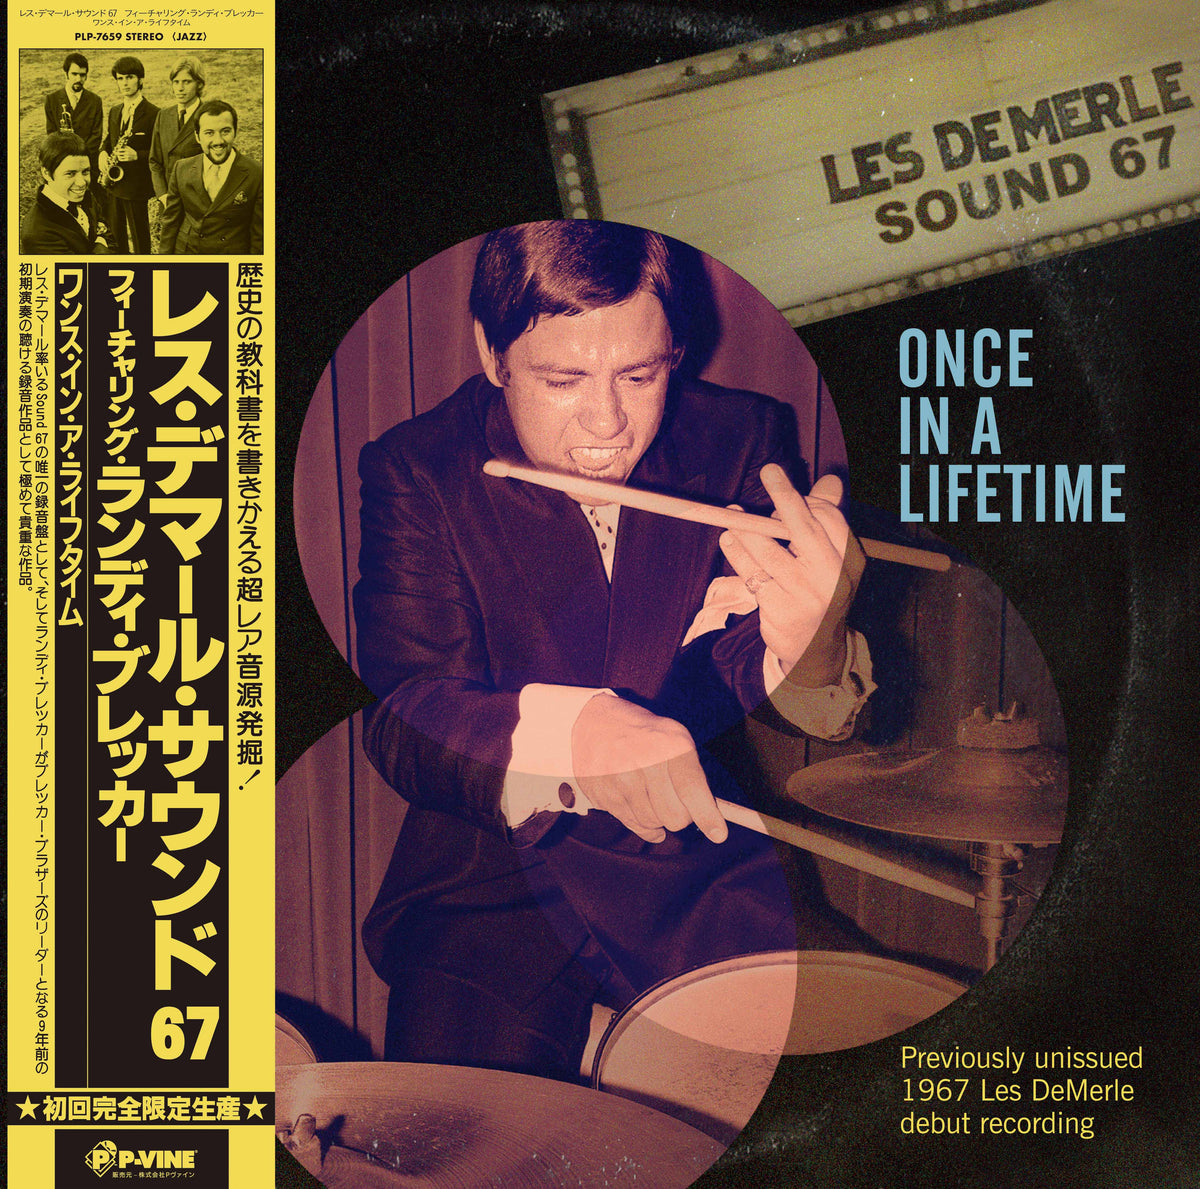 Les Demerle Sound 67 featuring Randy Brecker『Once In A Lifetime 